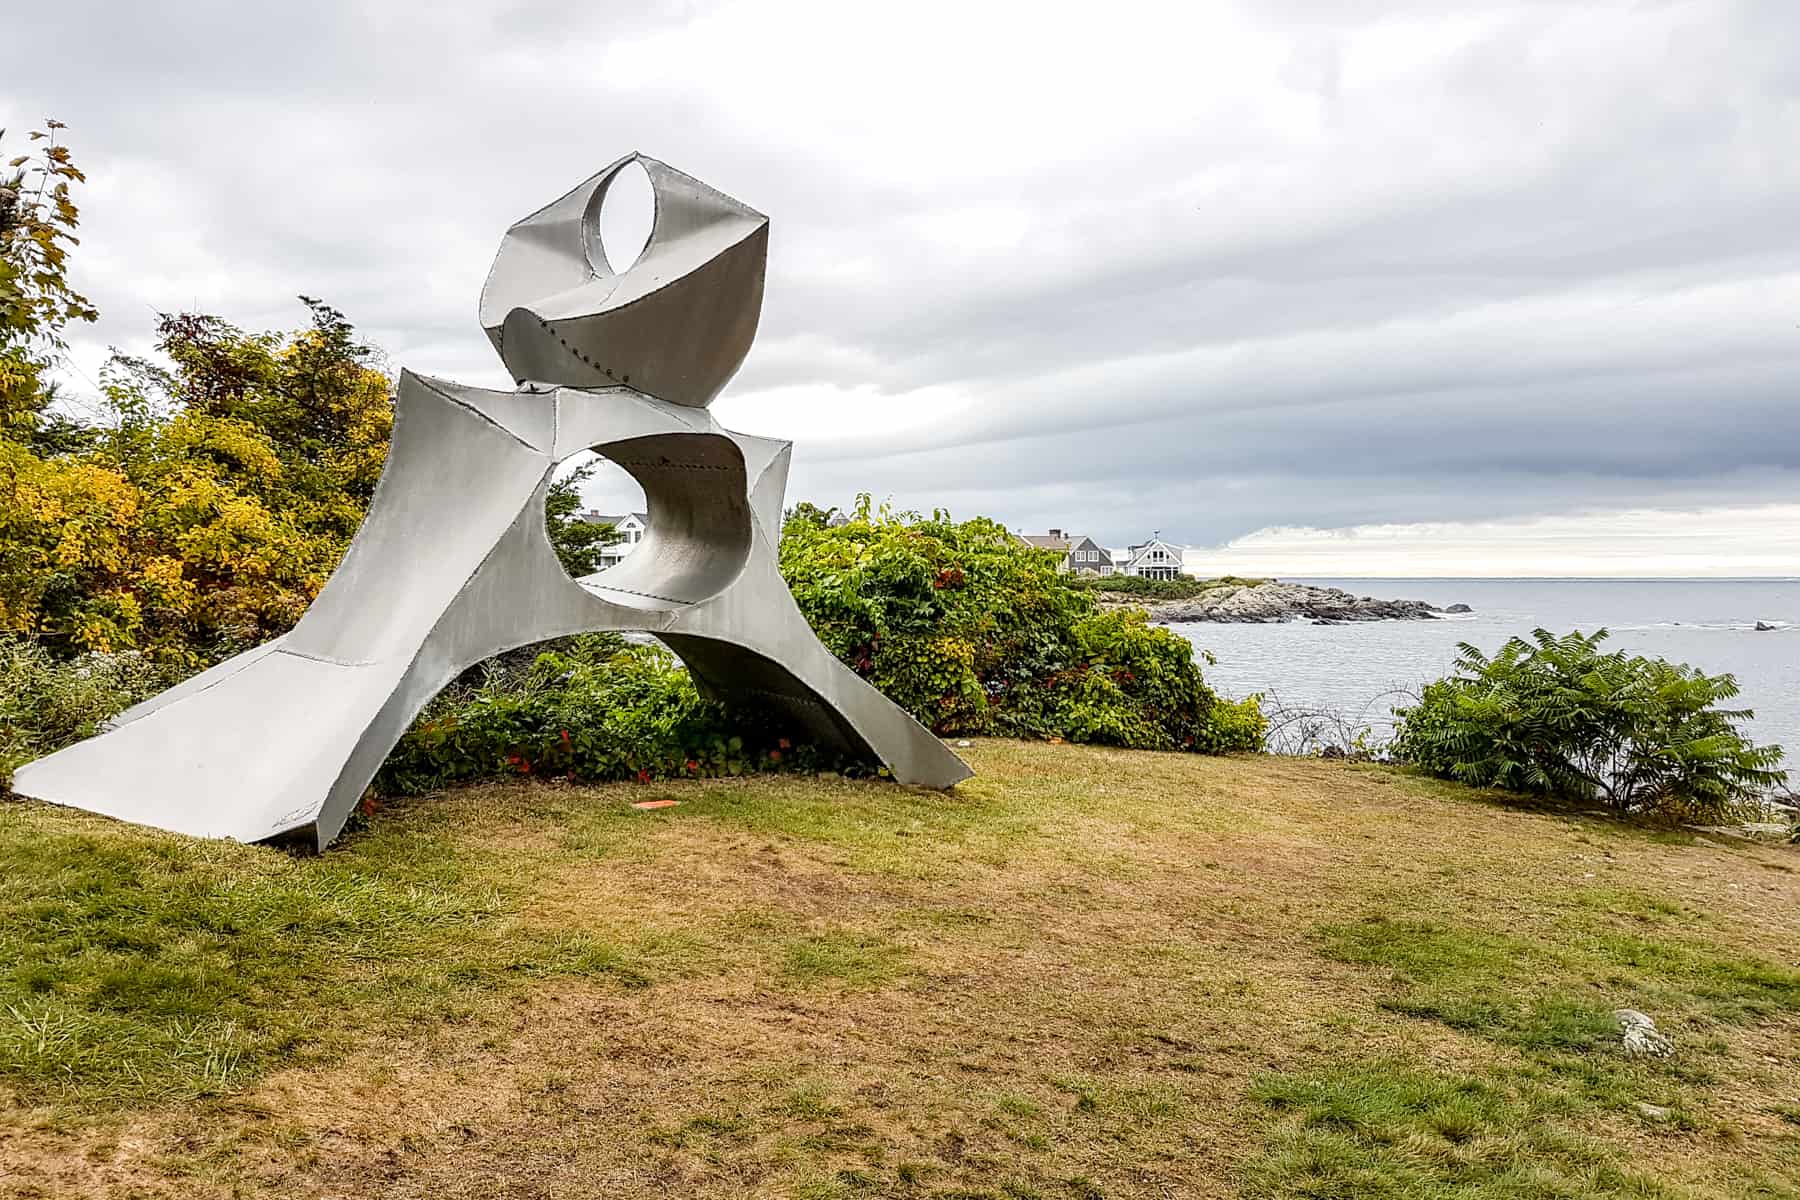 A silver sculpture at the Ogunquit Museum of American Art, fund along the rocky coastline of Maine. 